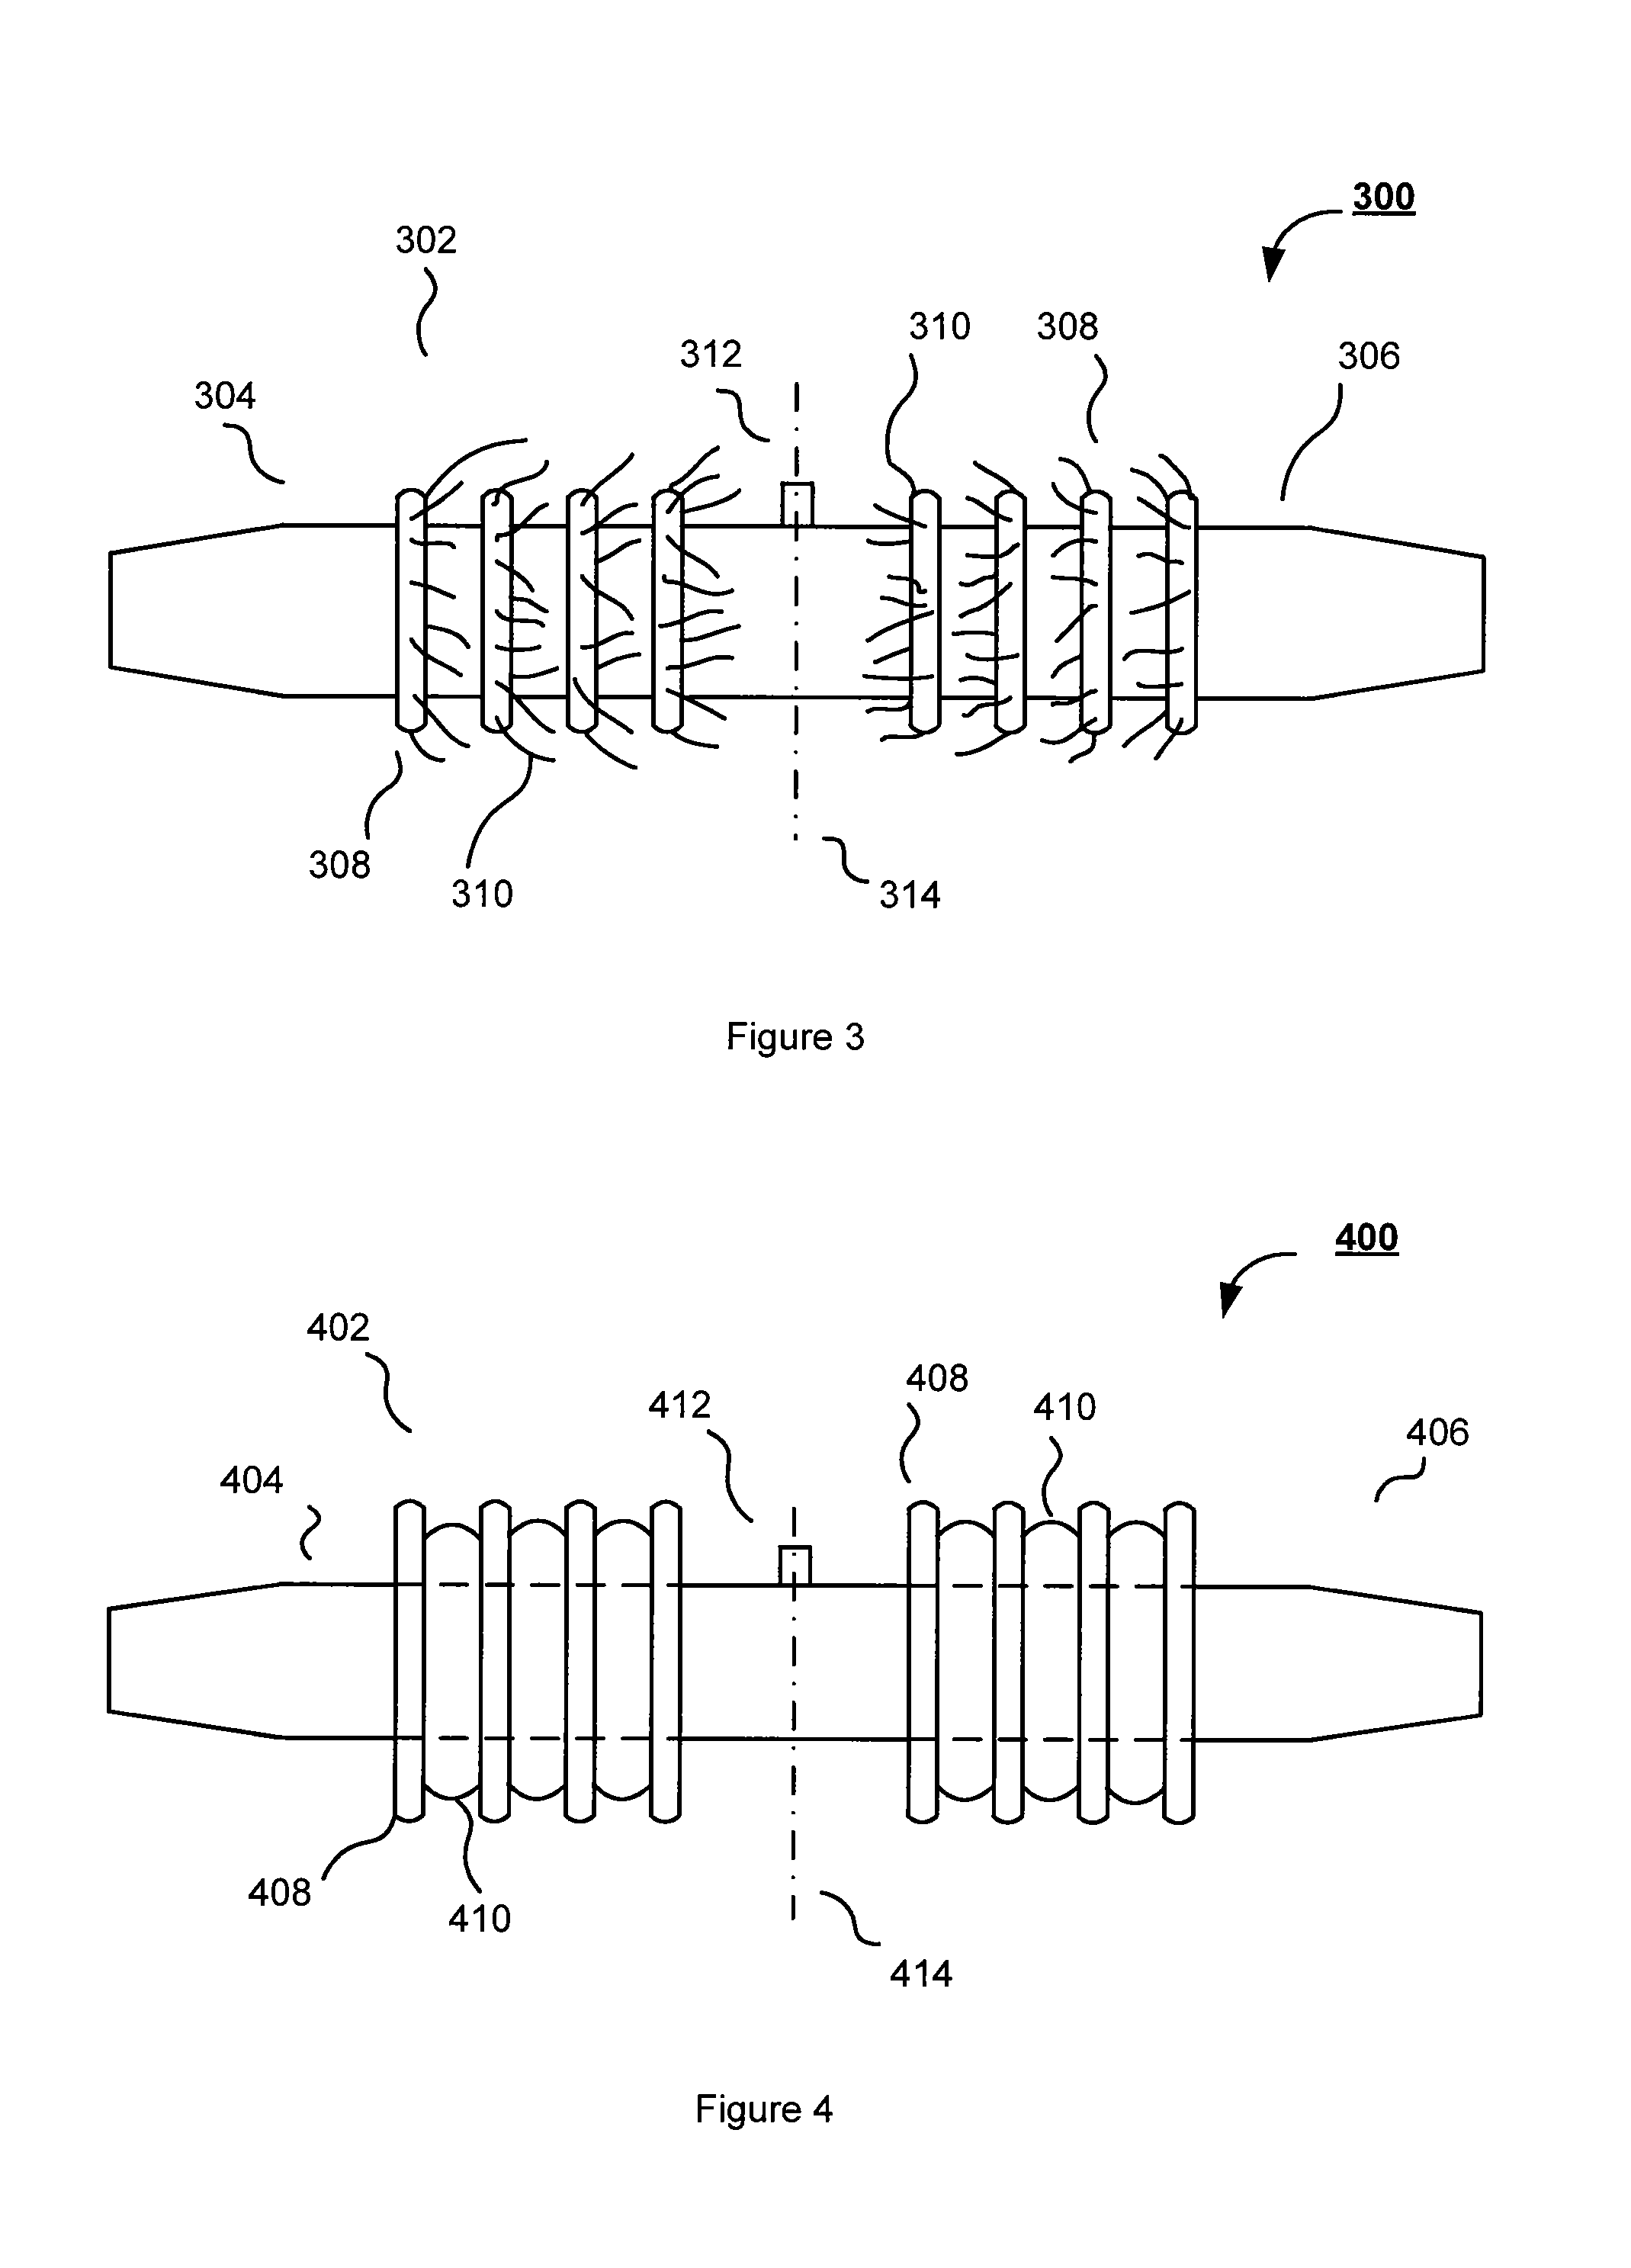 Connector for insulating glazing units with multiple barriers for moisture vapor and gas